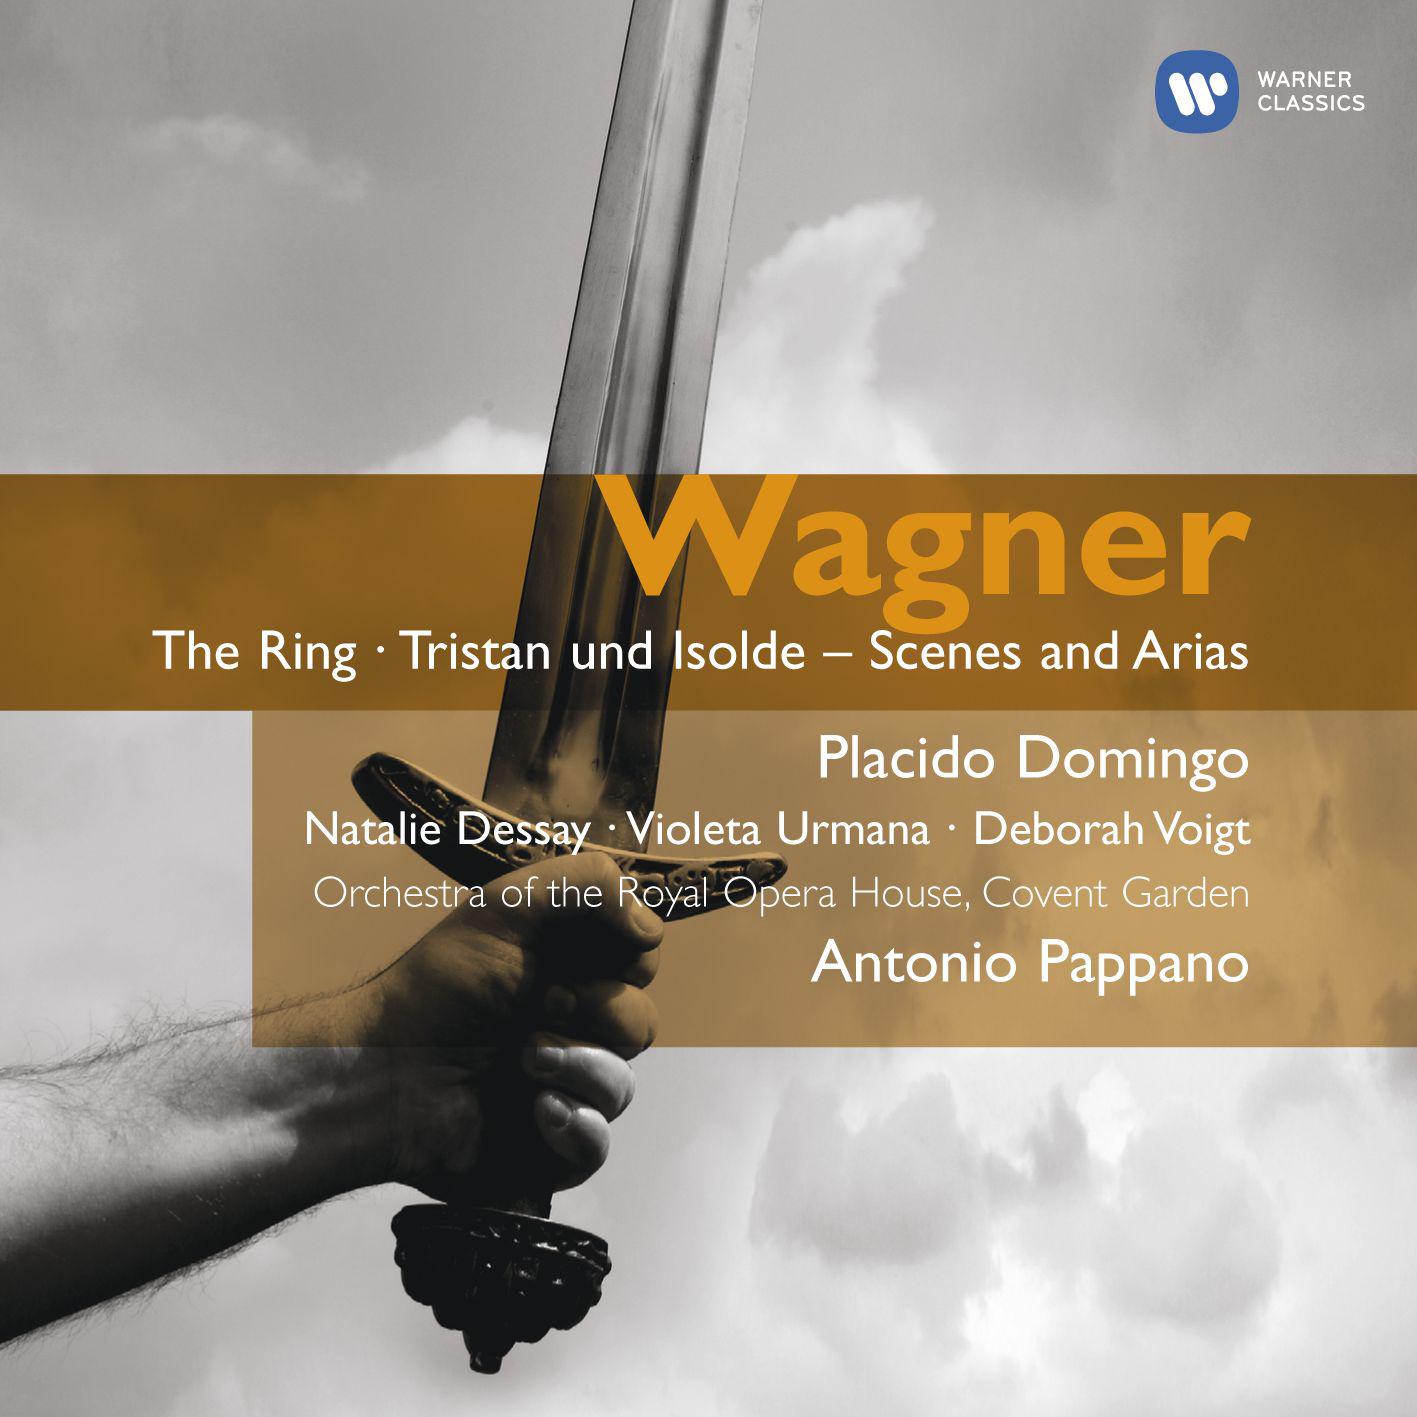 Wagner: The Ring, Tristan und Isolde - Scenes and Arias